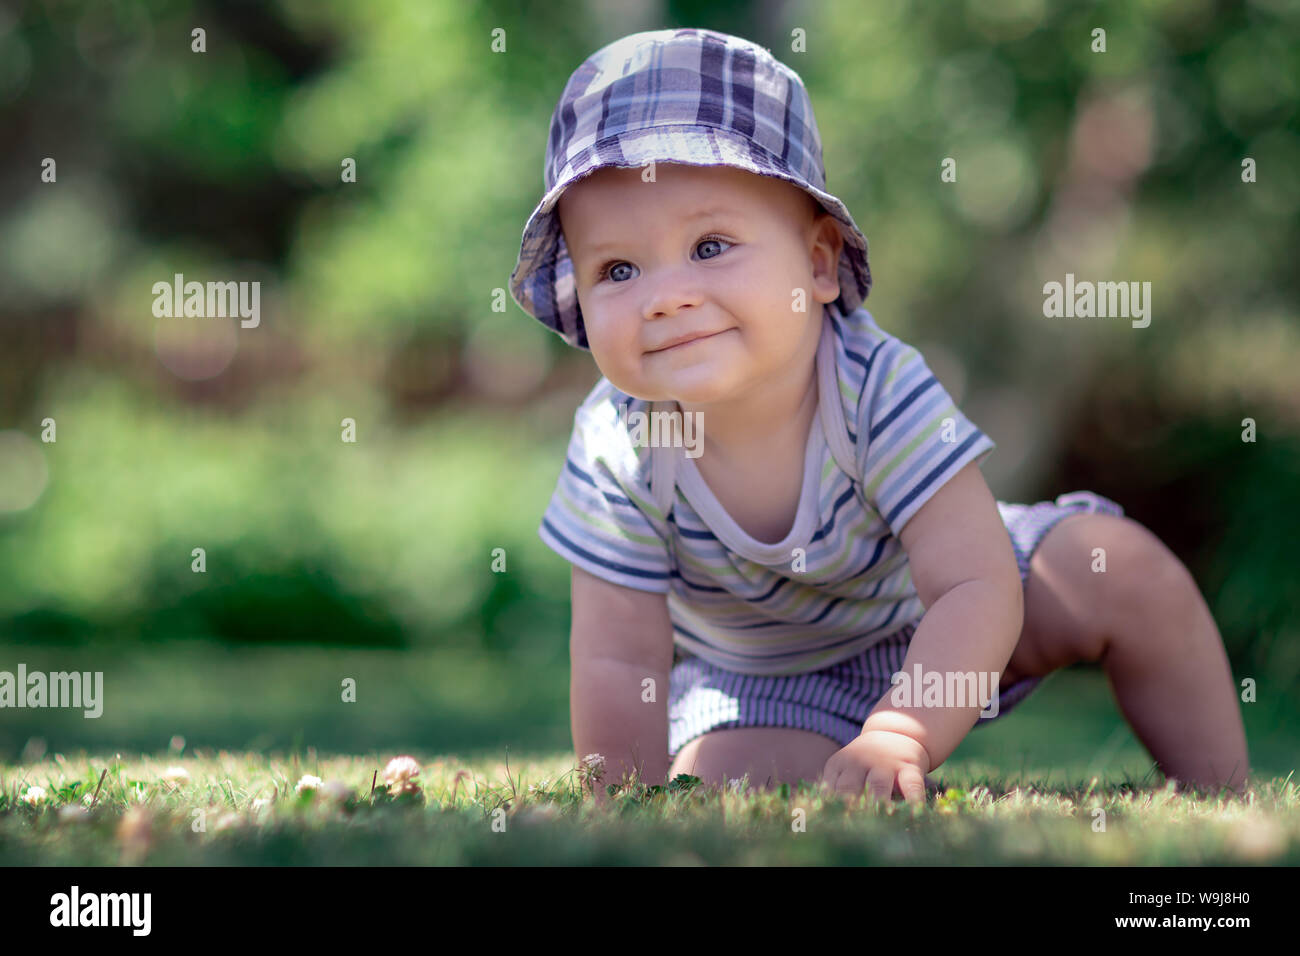 Baby with nice blue cap crawling on the green grass in the garden Stock Photo